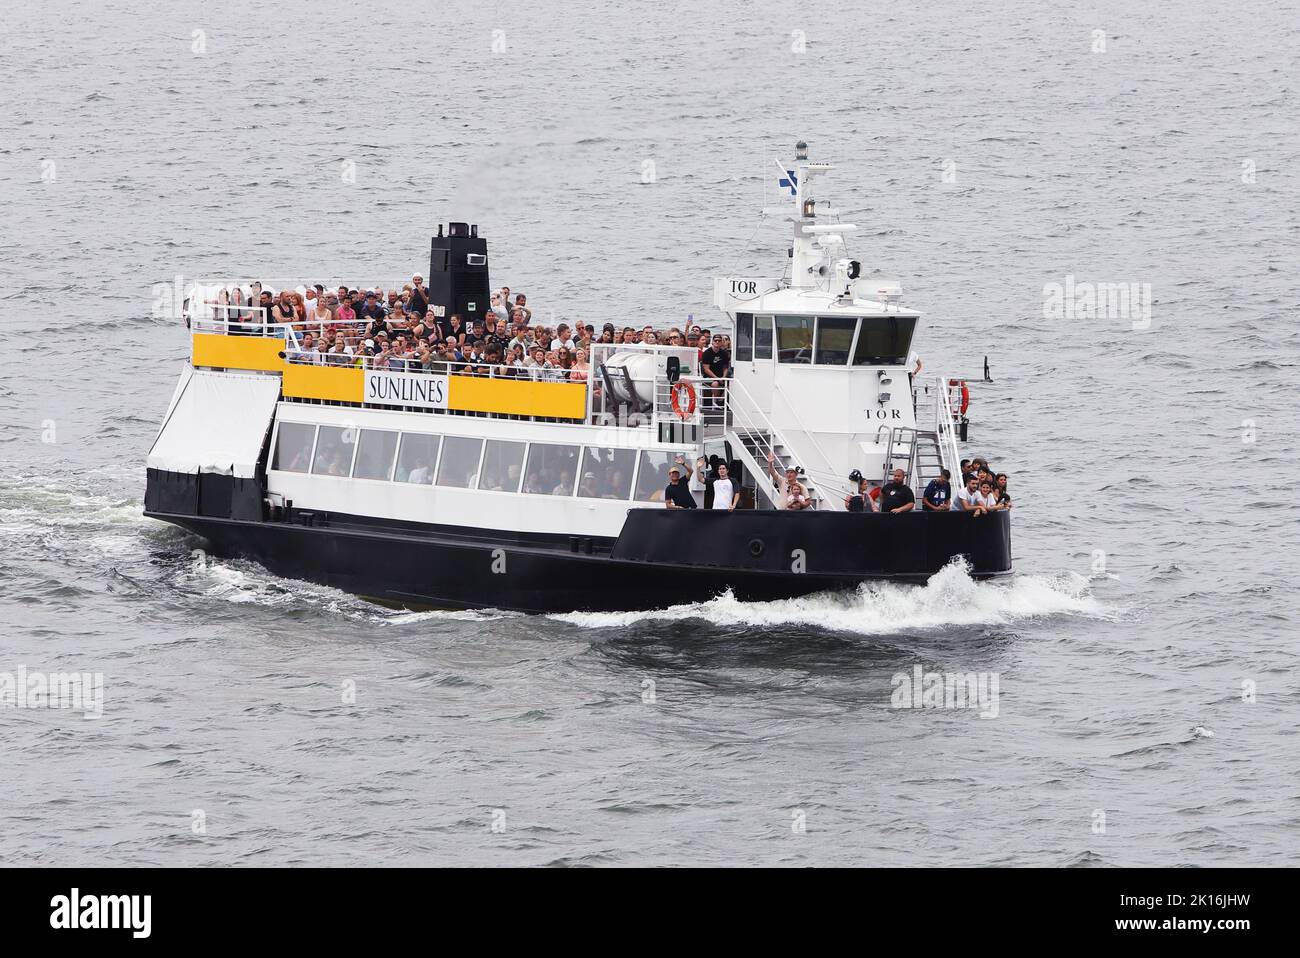 Helsinki, Finland - August 20, 2022: Sunblines tour boat with happy passengers in the port of Helsinki. Stock Photo